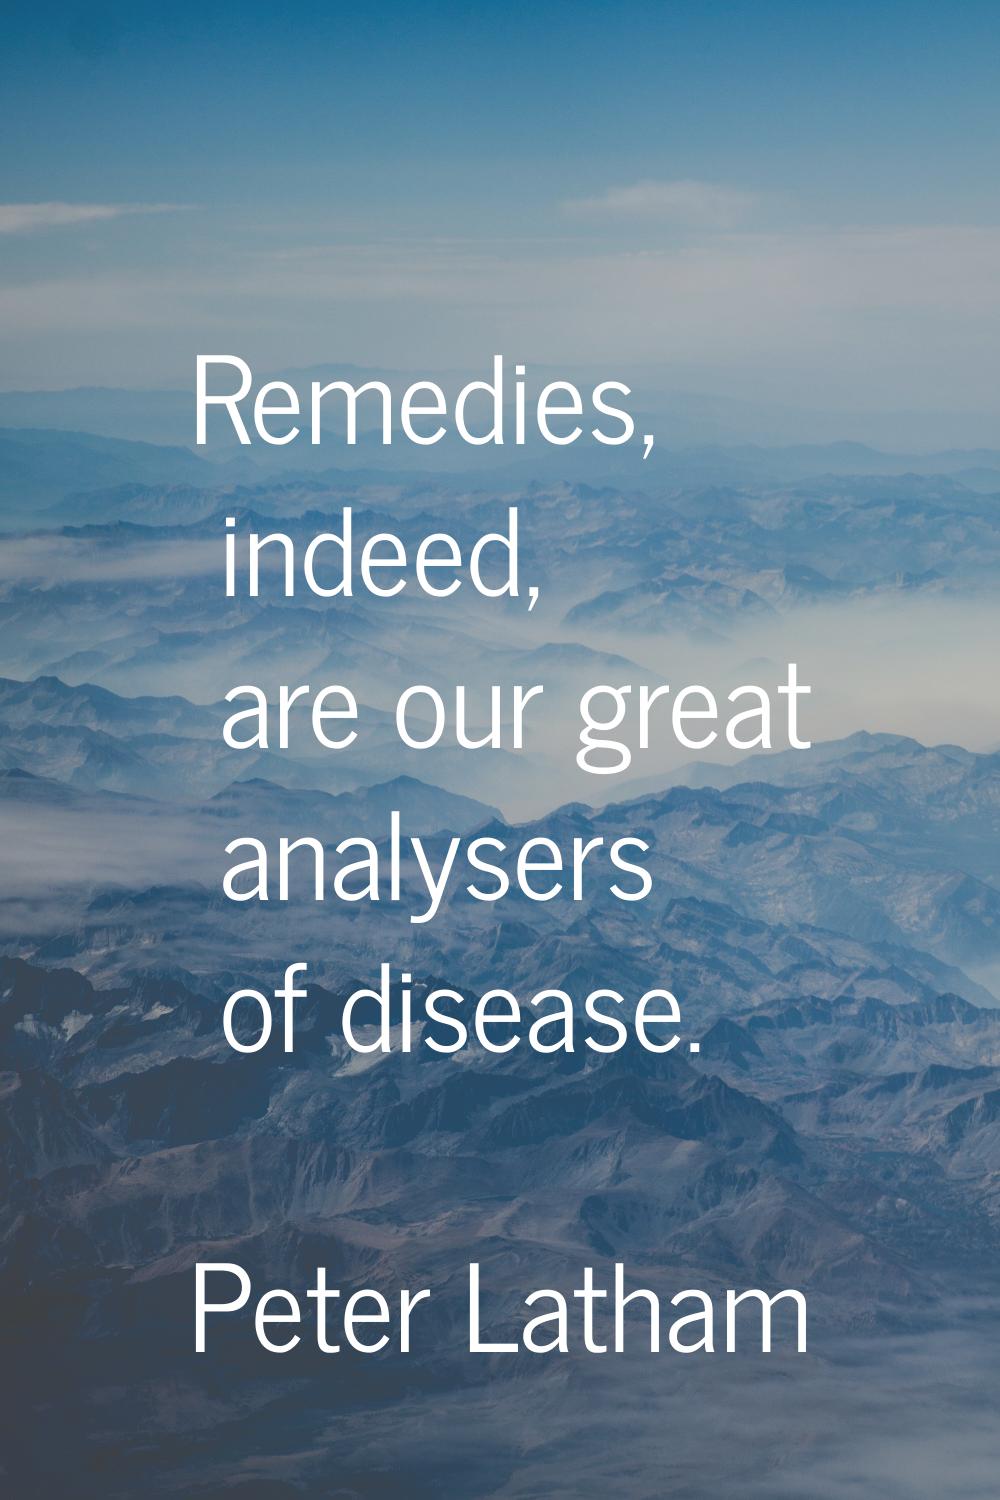 Remedies, indeed, are our great analysers of disease.